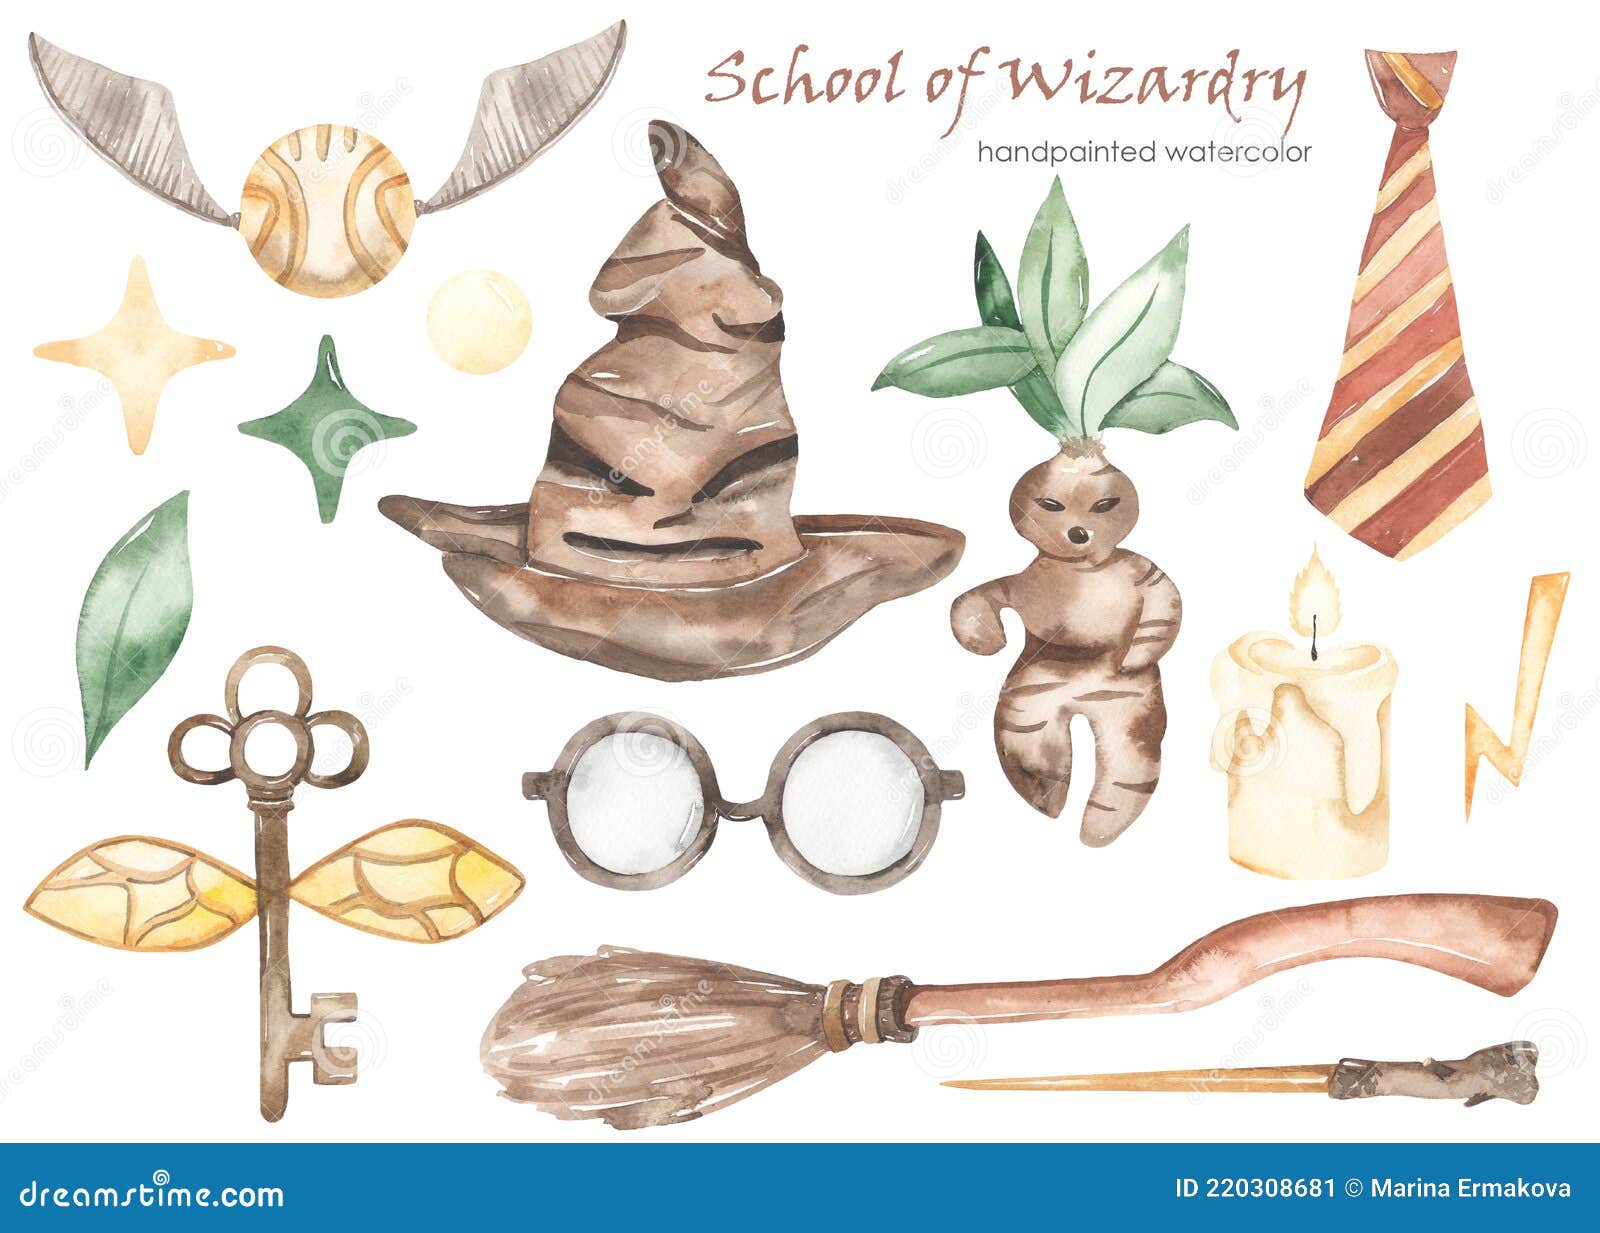 watercolor set school of wizardry with talking hat, snitch, tie, mandrake, broom, candle, key, glasses